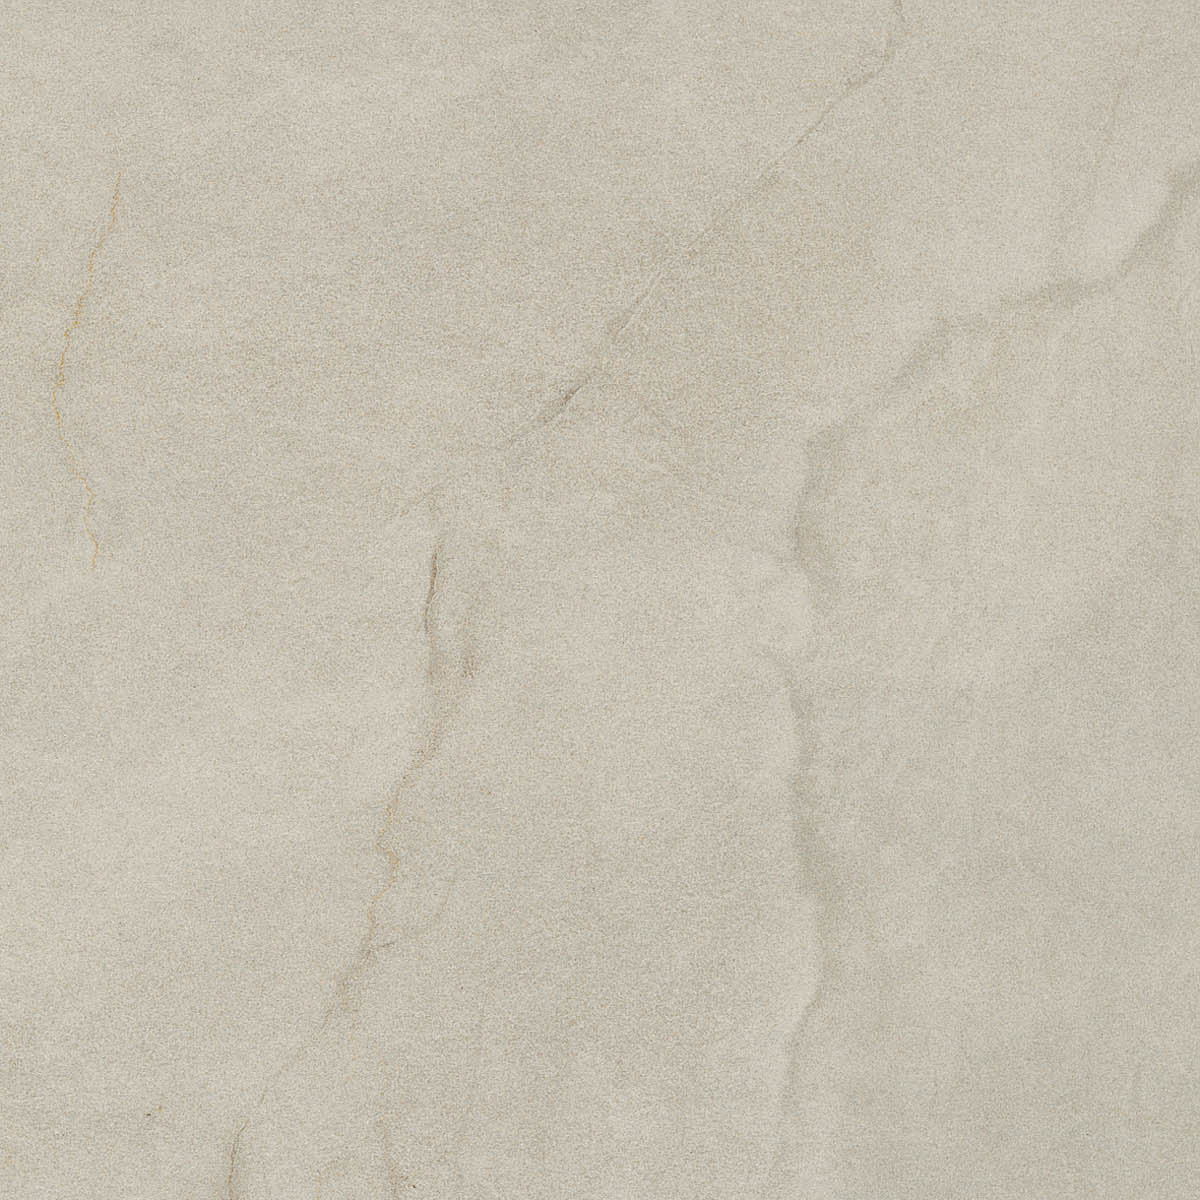 Imola Muse Grigio Lappato Flat Glossy 149460 120x120cm rectified 10,5mm - MUSE 120G LP